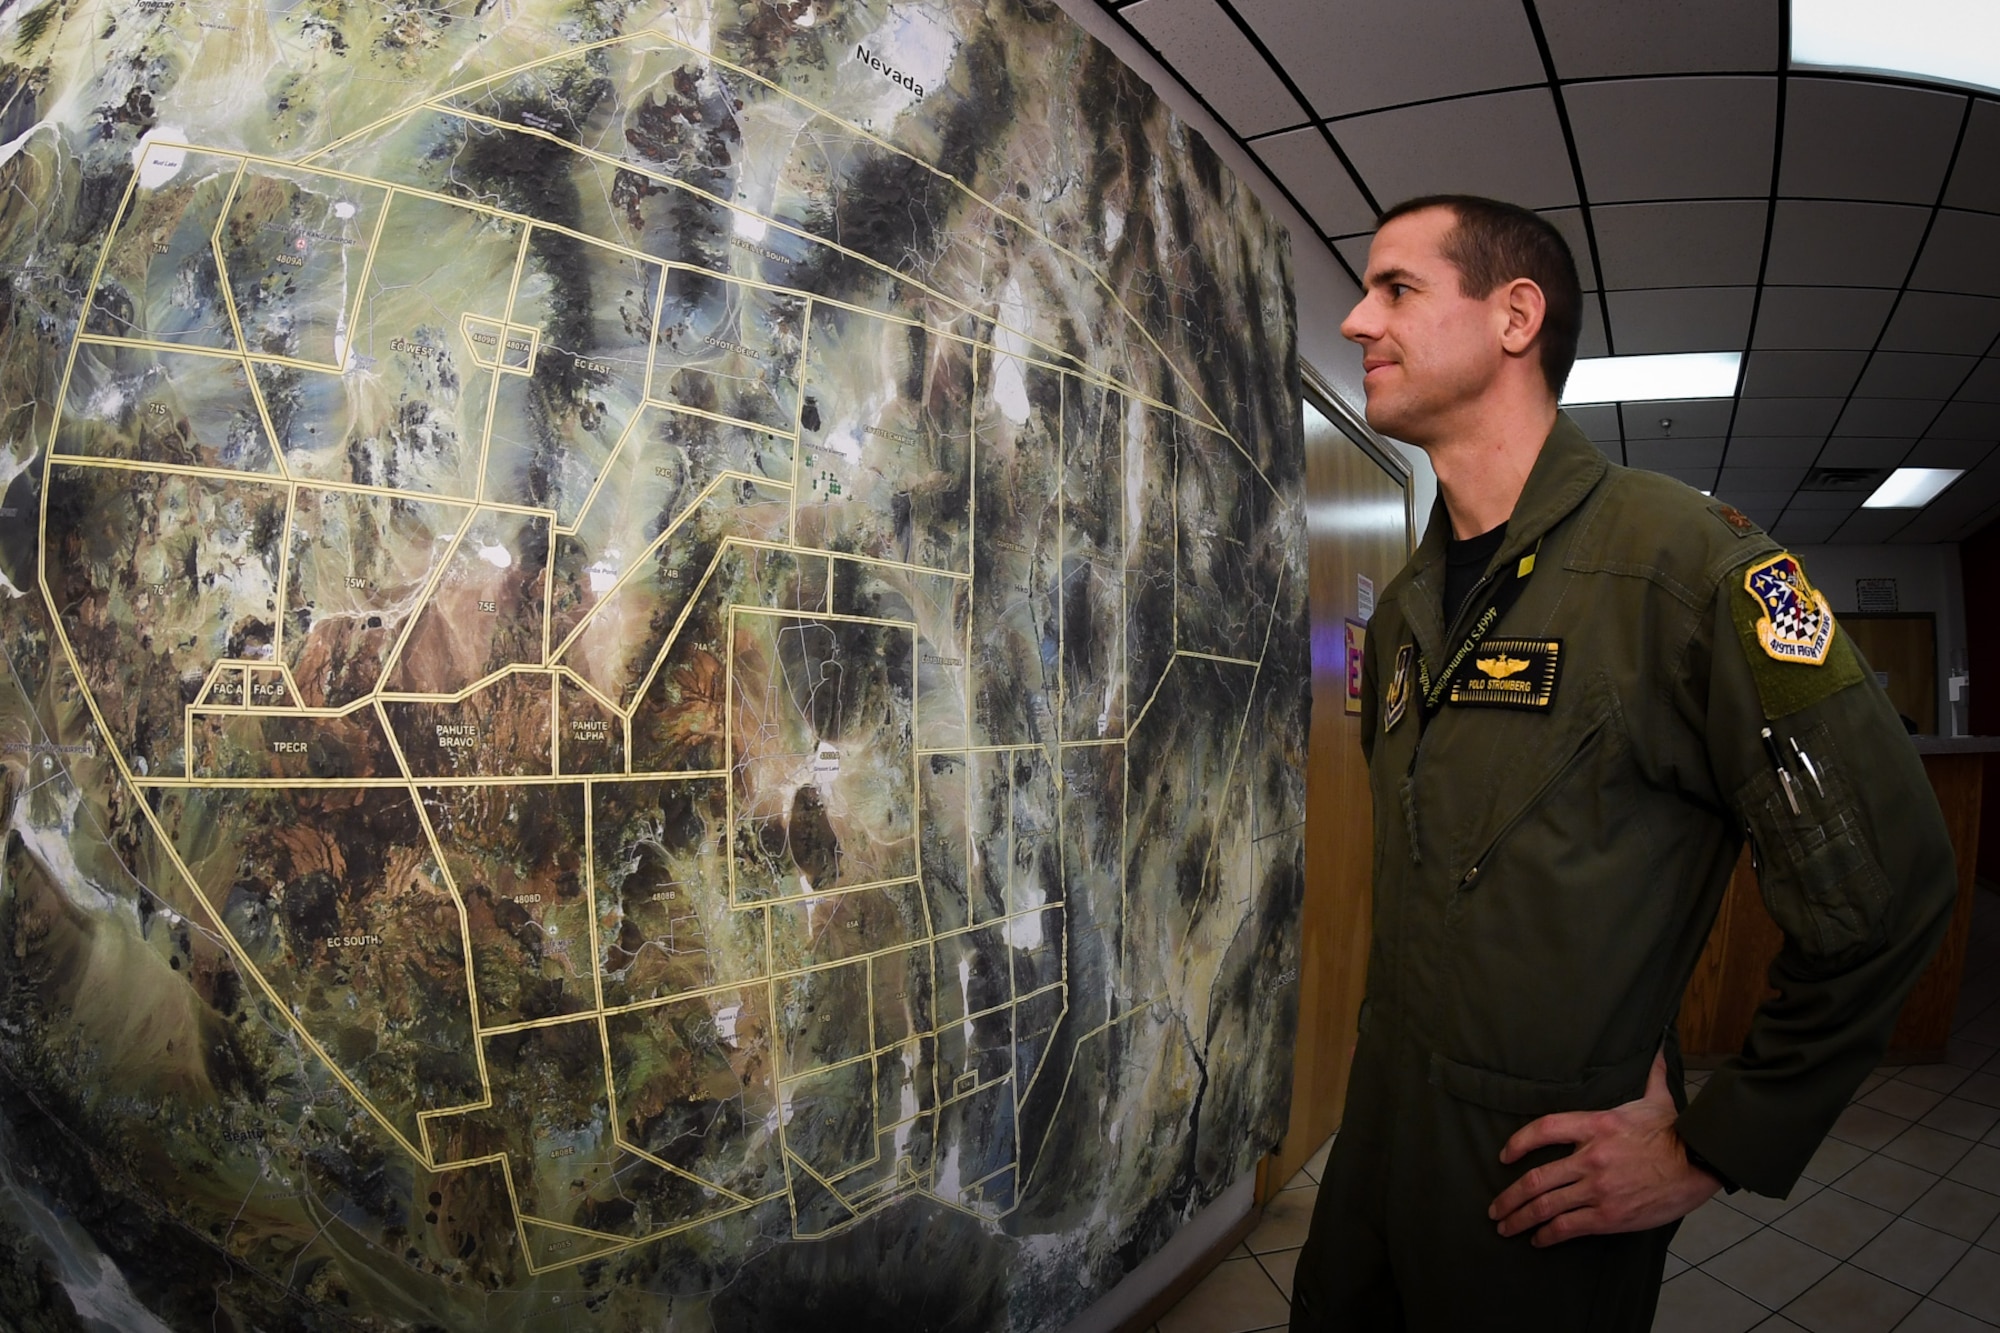 Maj. Shad Stromberg, F-35A pilot in the 419th Fighter Wing, surveys a map of the Nevada Test and Training Range during the Red Flag exercise at Nellis Air Force Base, Nev., Feb. 3. (U.S. Air Force photo/R. Nial Bradshaw)